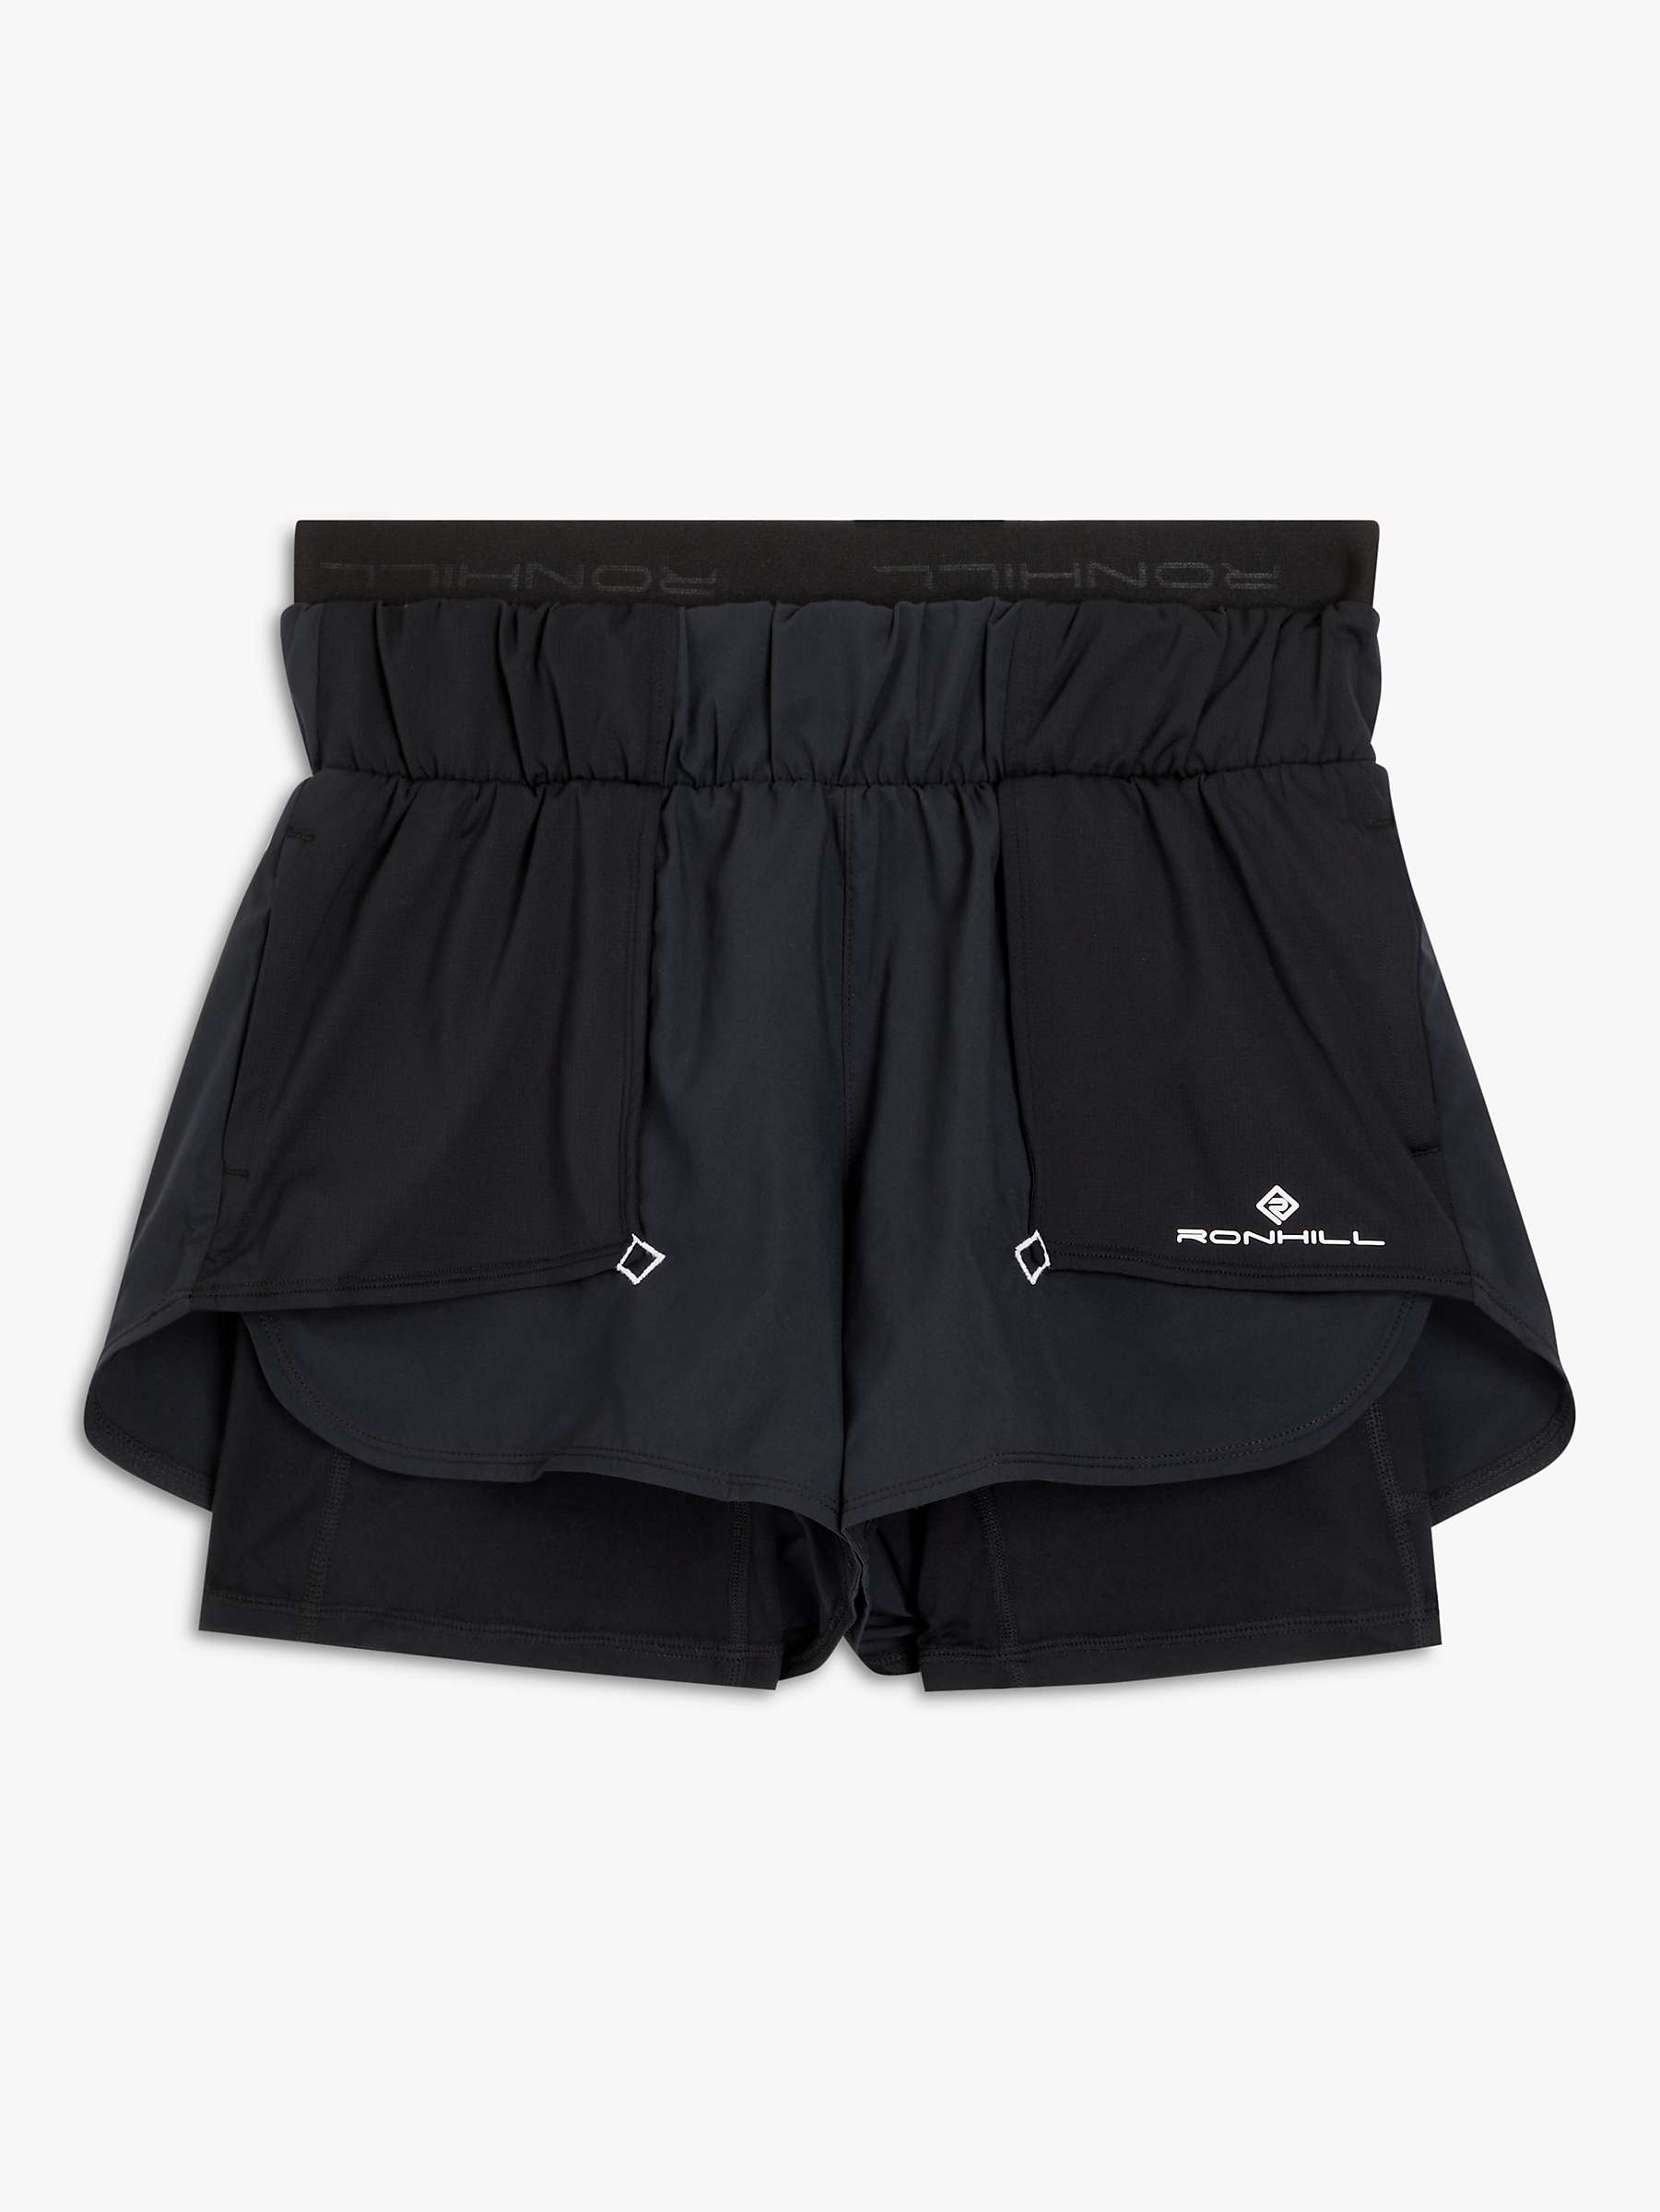 Buy Ronhill Tech Twin Running Shorts Online at johnlewis.com